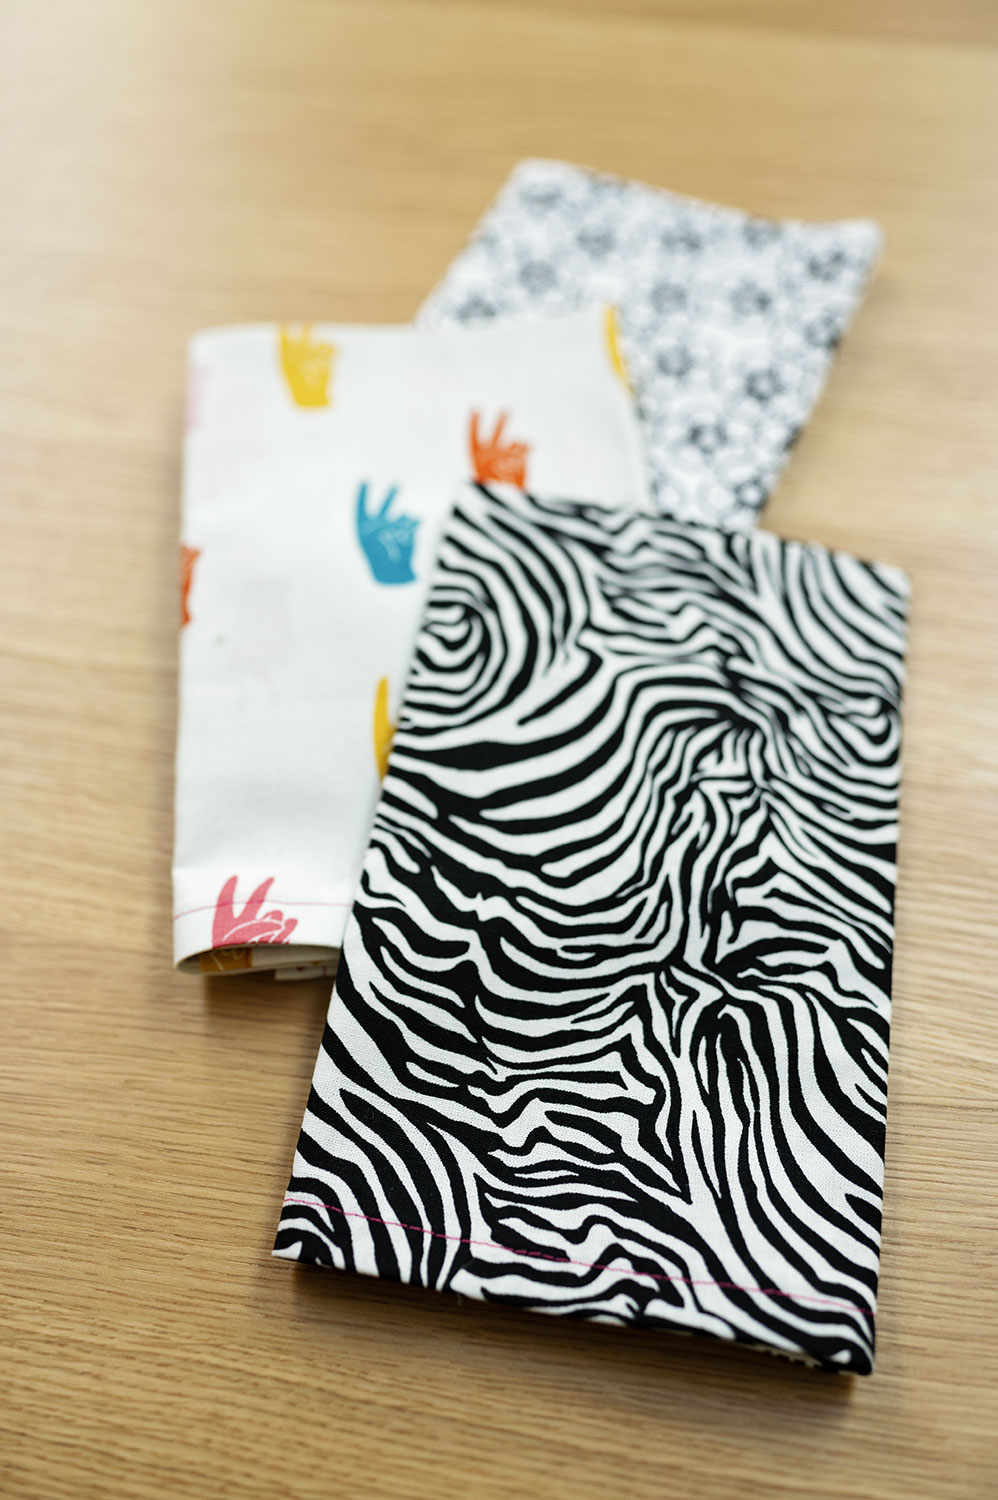 a pile of 3 neatly folded cloth napkins. The one on top is a zebra print